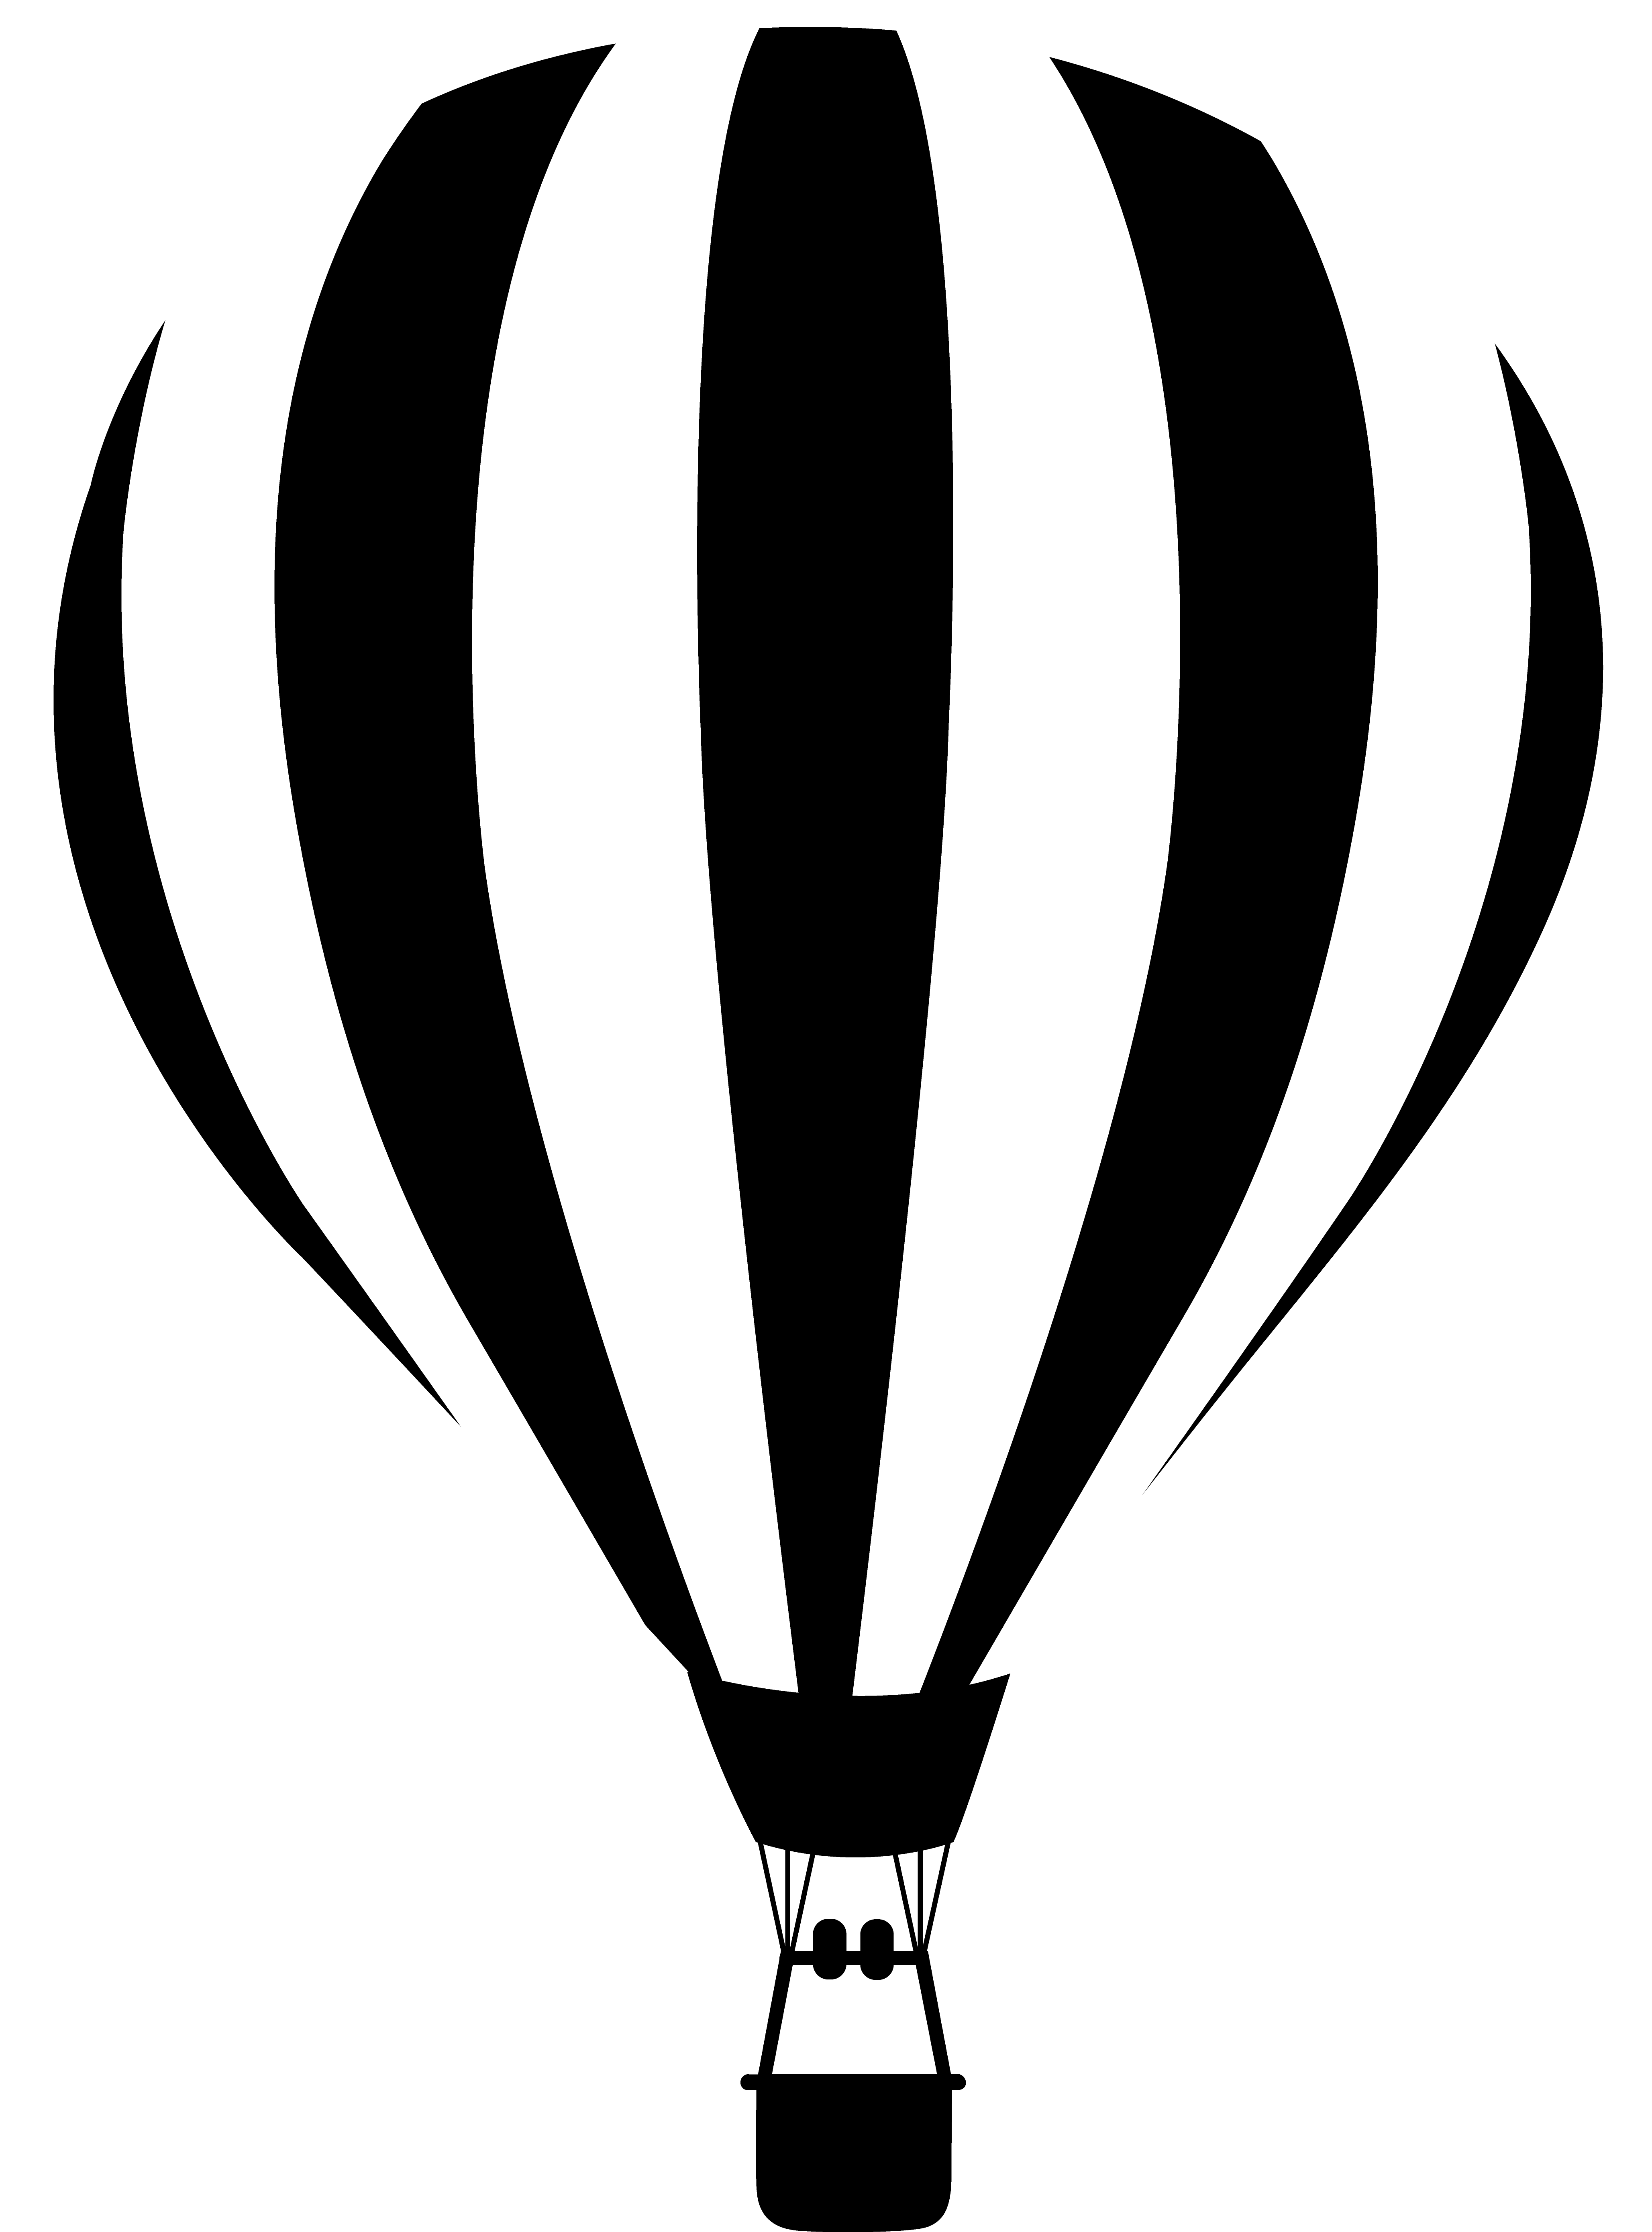 1000+ images about Reference Images: Hot Air Balloons on Pinterest.